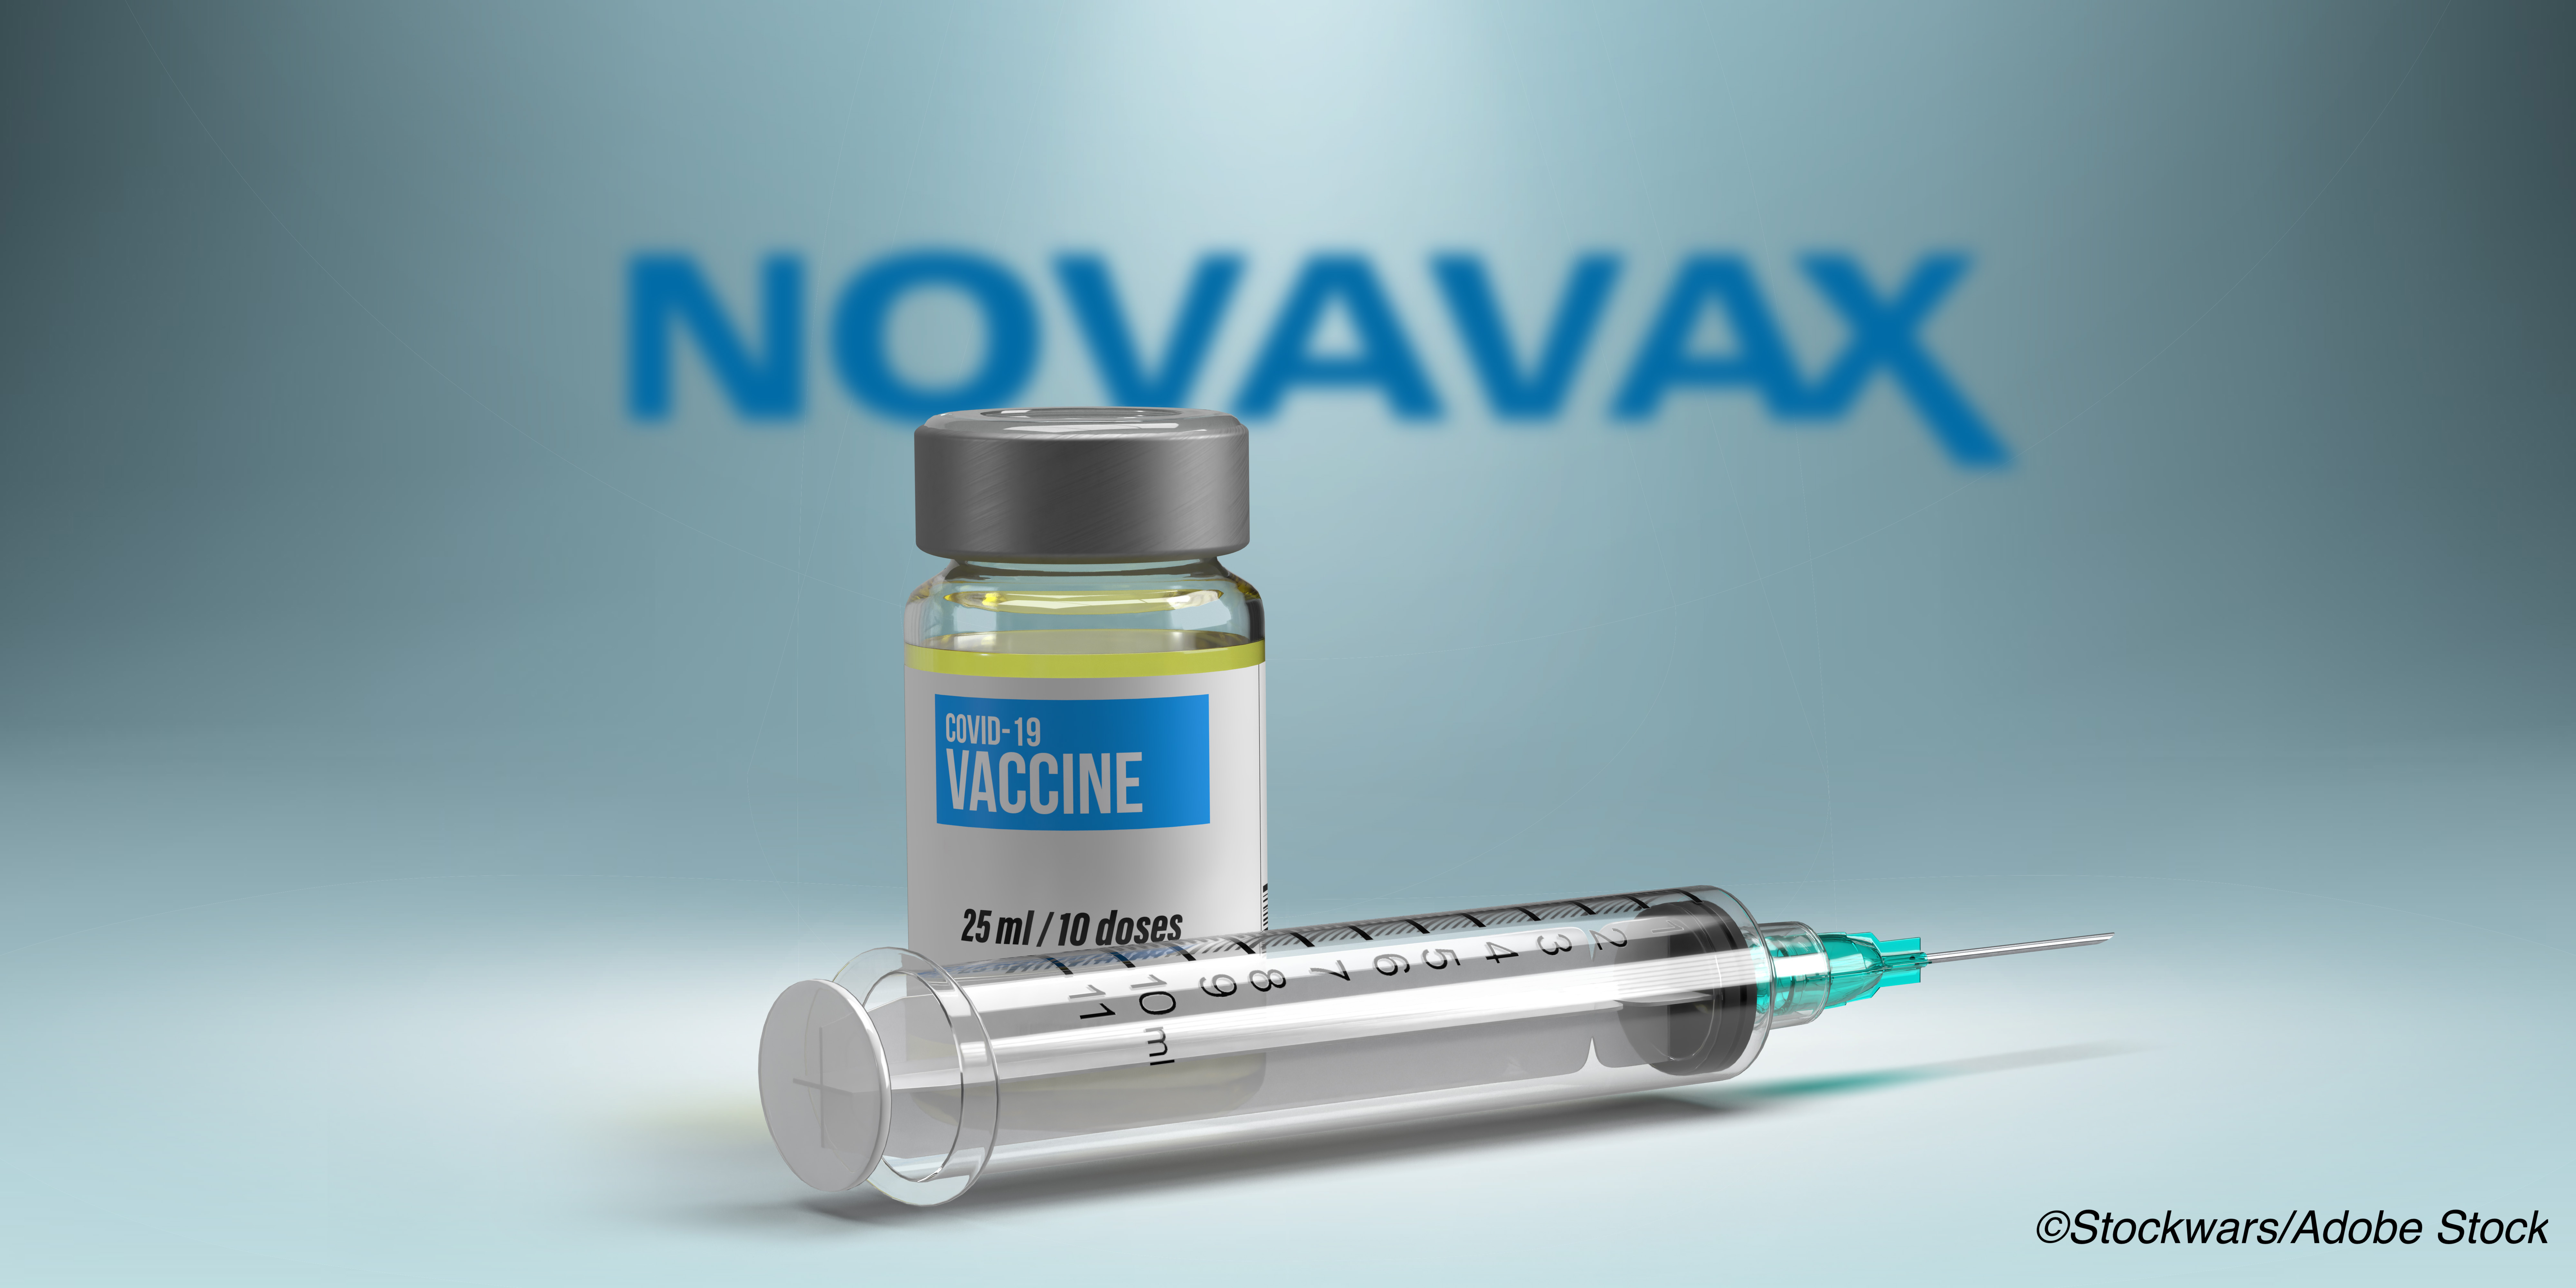 Covid-19: Protein-Based Vax Safe, Highly Effective, Study Finds